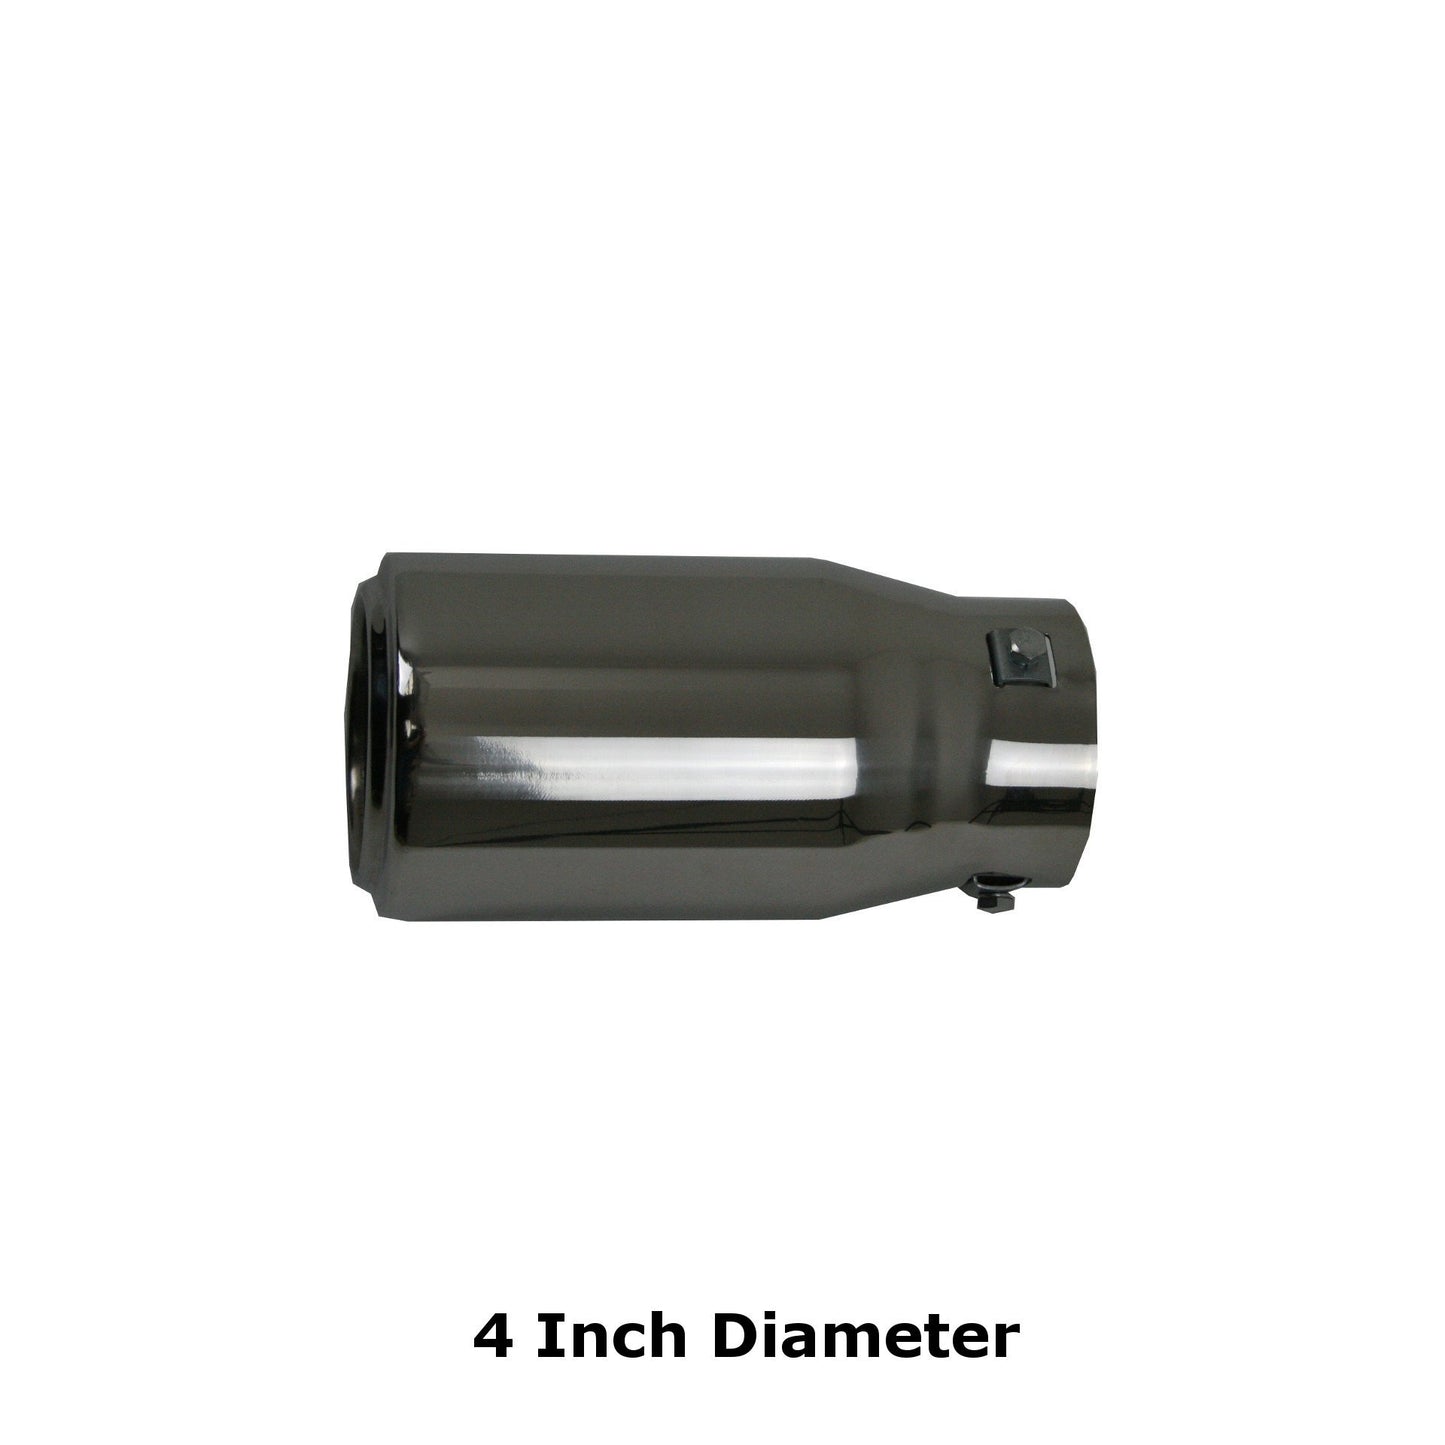 3 Inch Diameter Stainless Steel Short Exhaust Tip -  - sold by Direct4x4